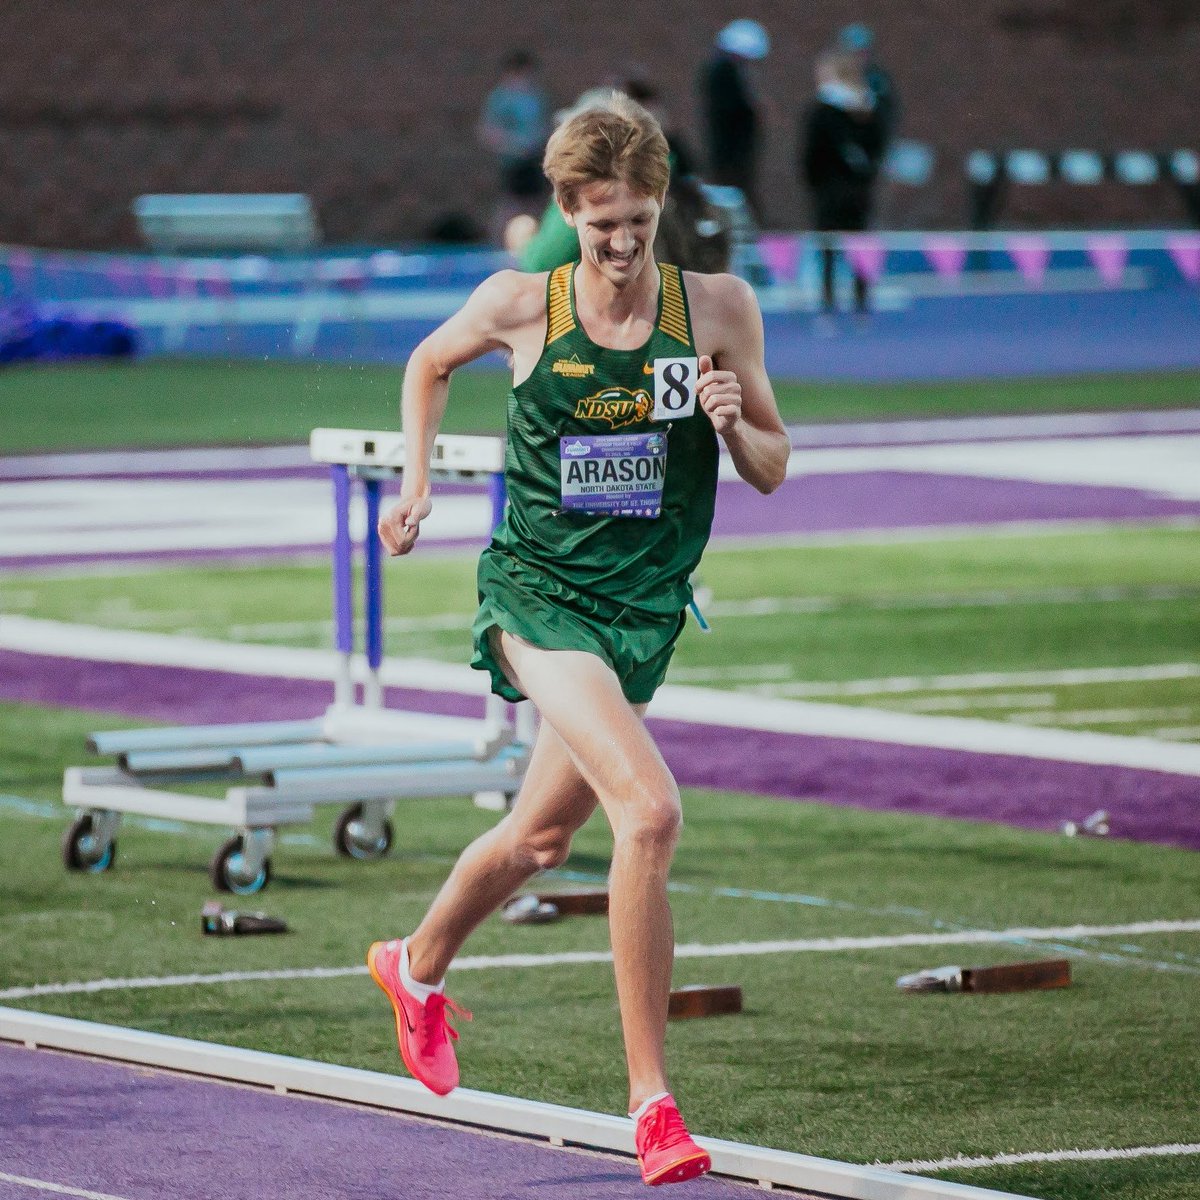 Jake Arason finished 6th in the Summit League 5,000m, bringing home 3 key team points for the Bison.